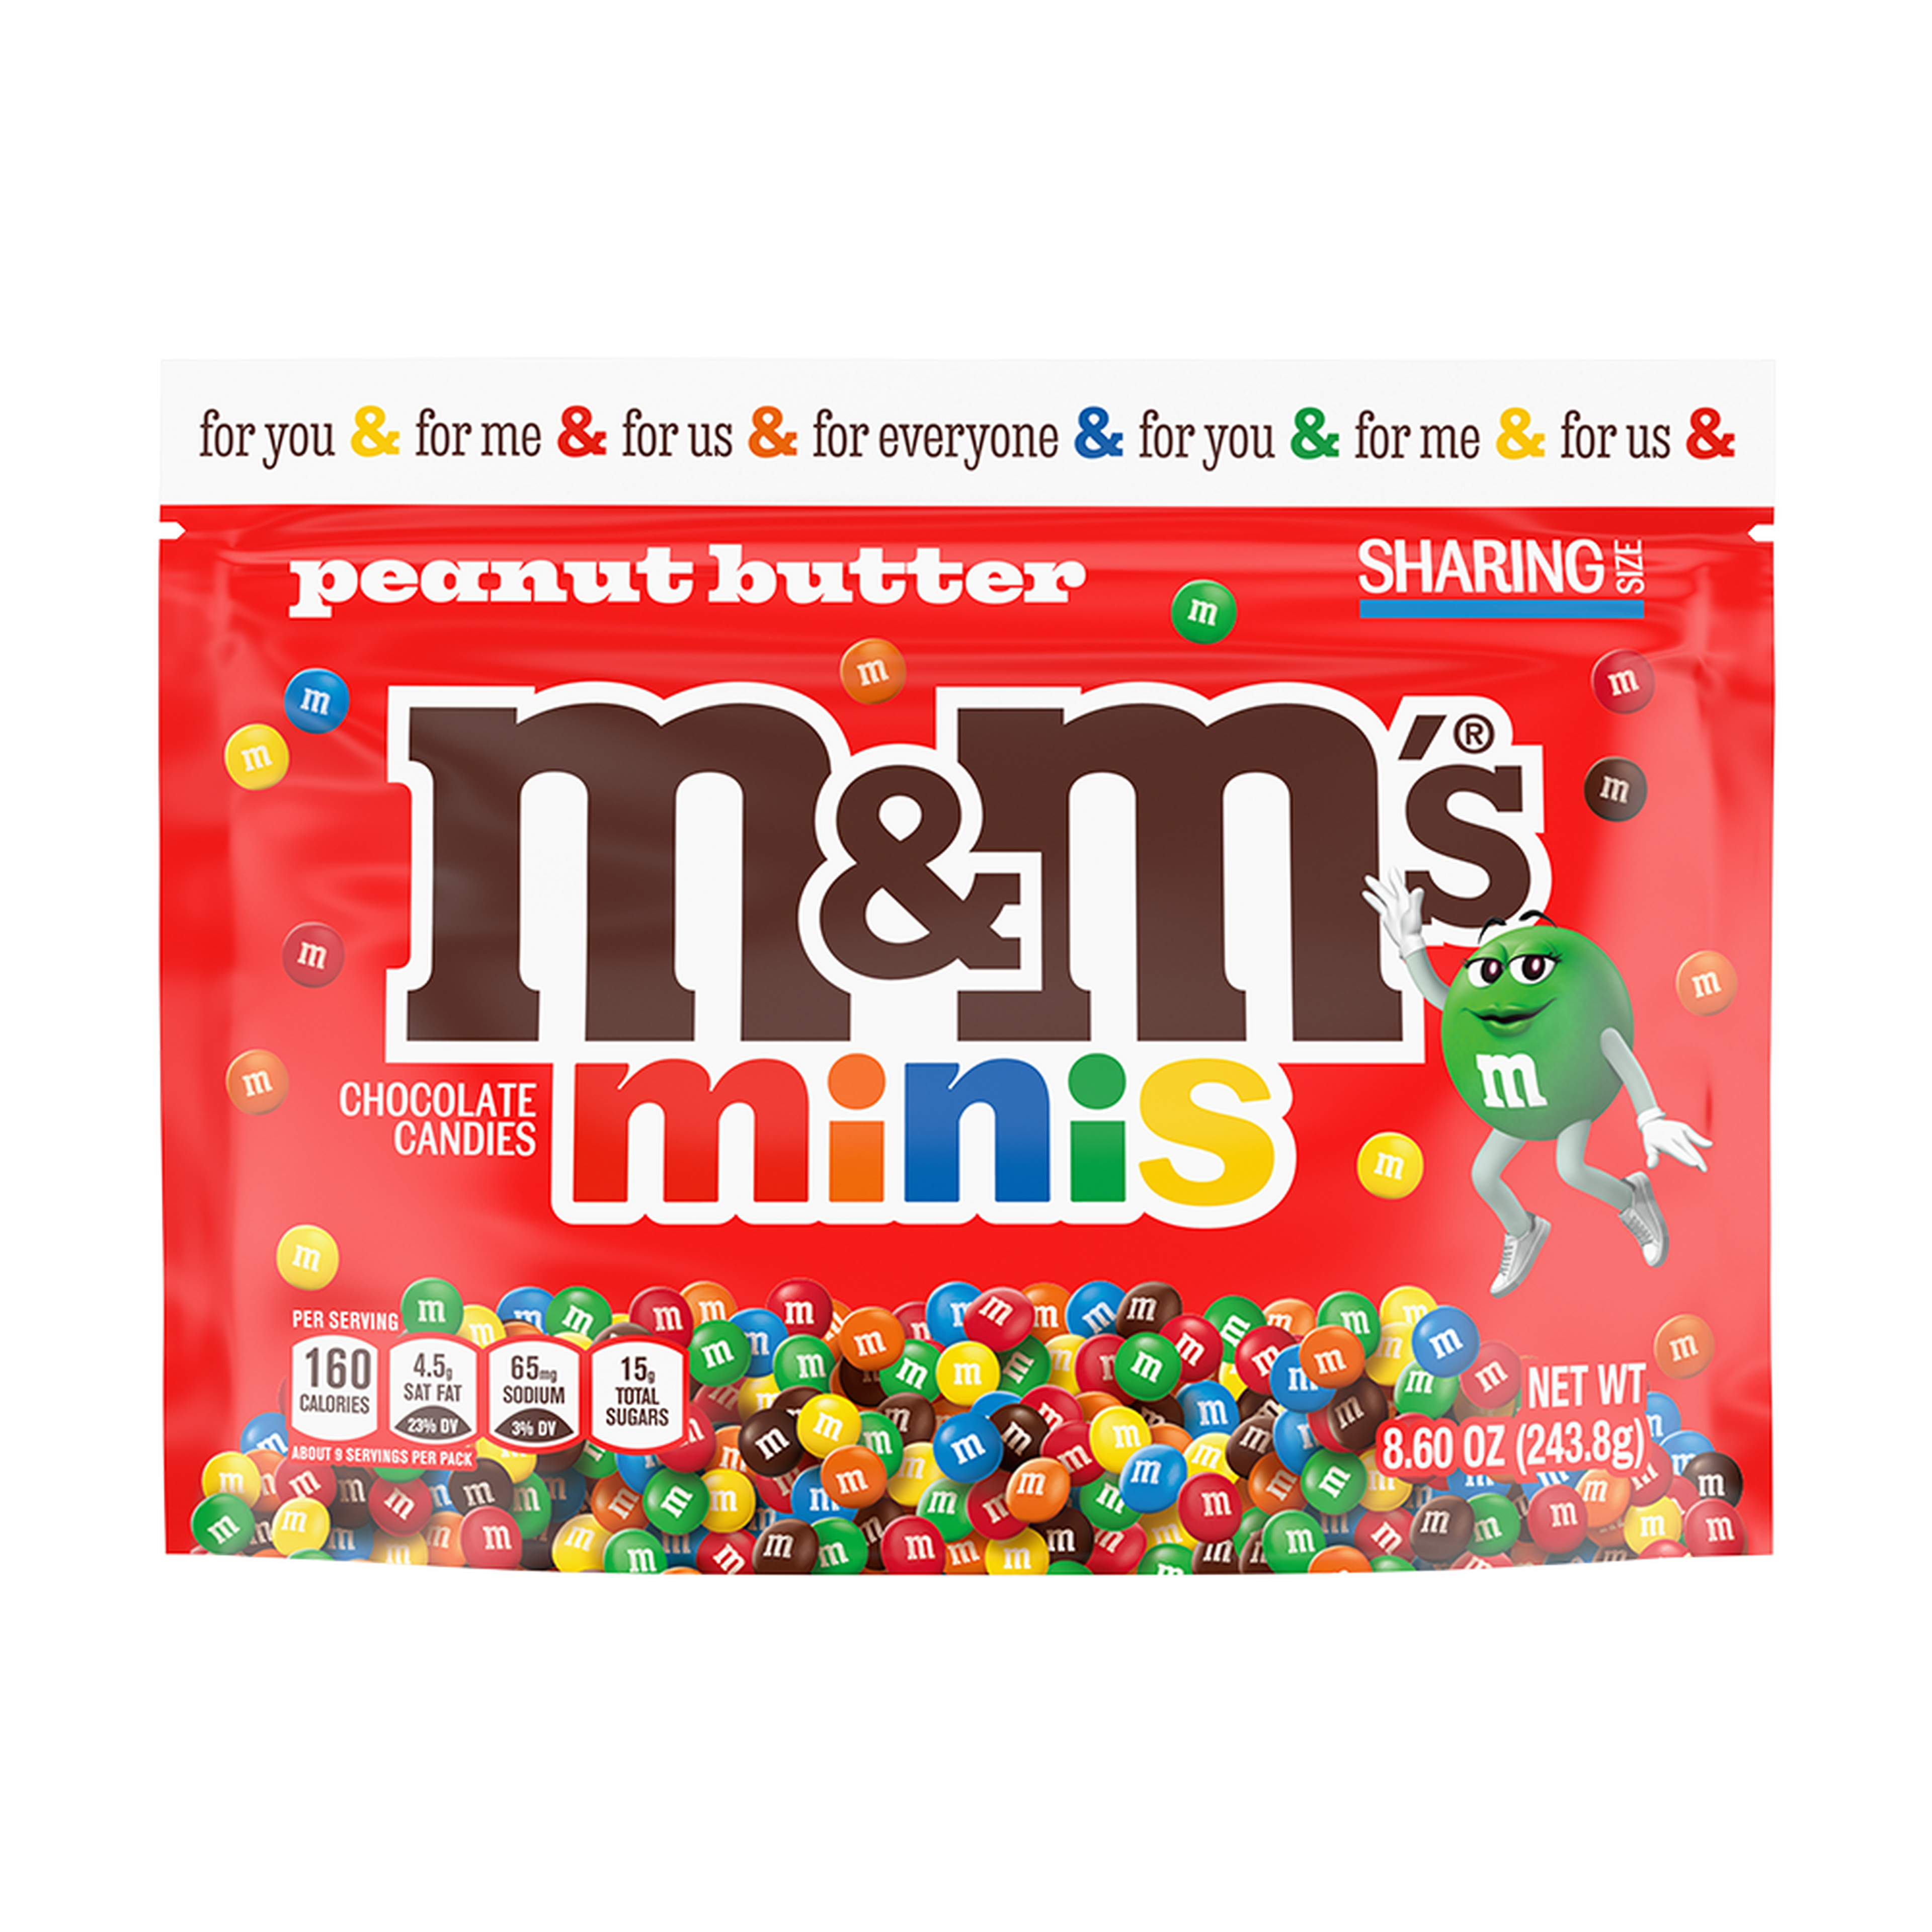 Musician-Backed Mixed Snacks : M&M'S MIX